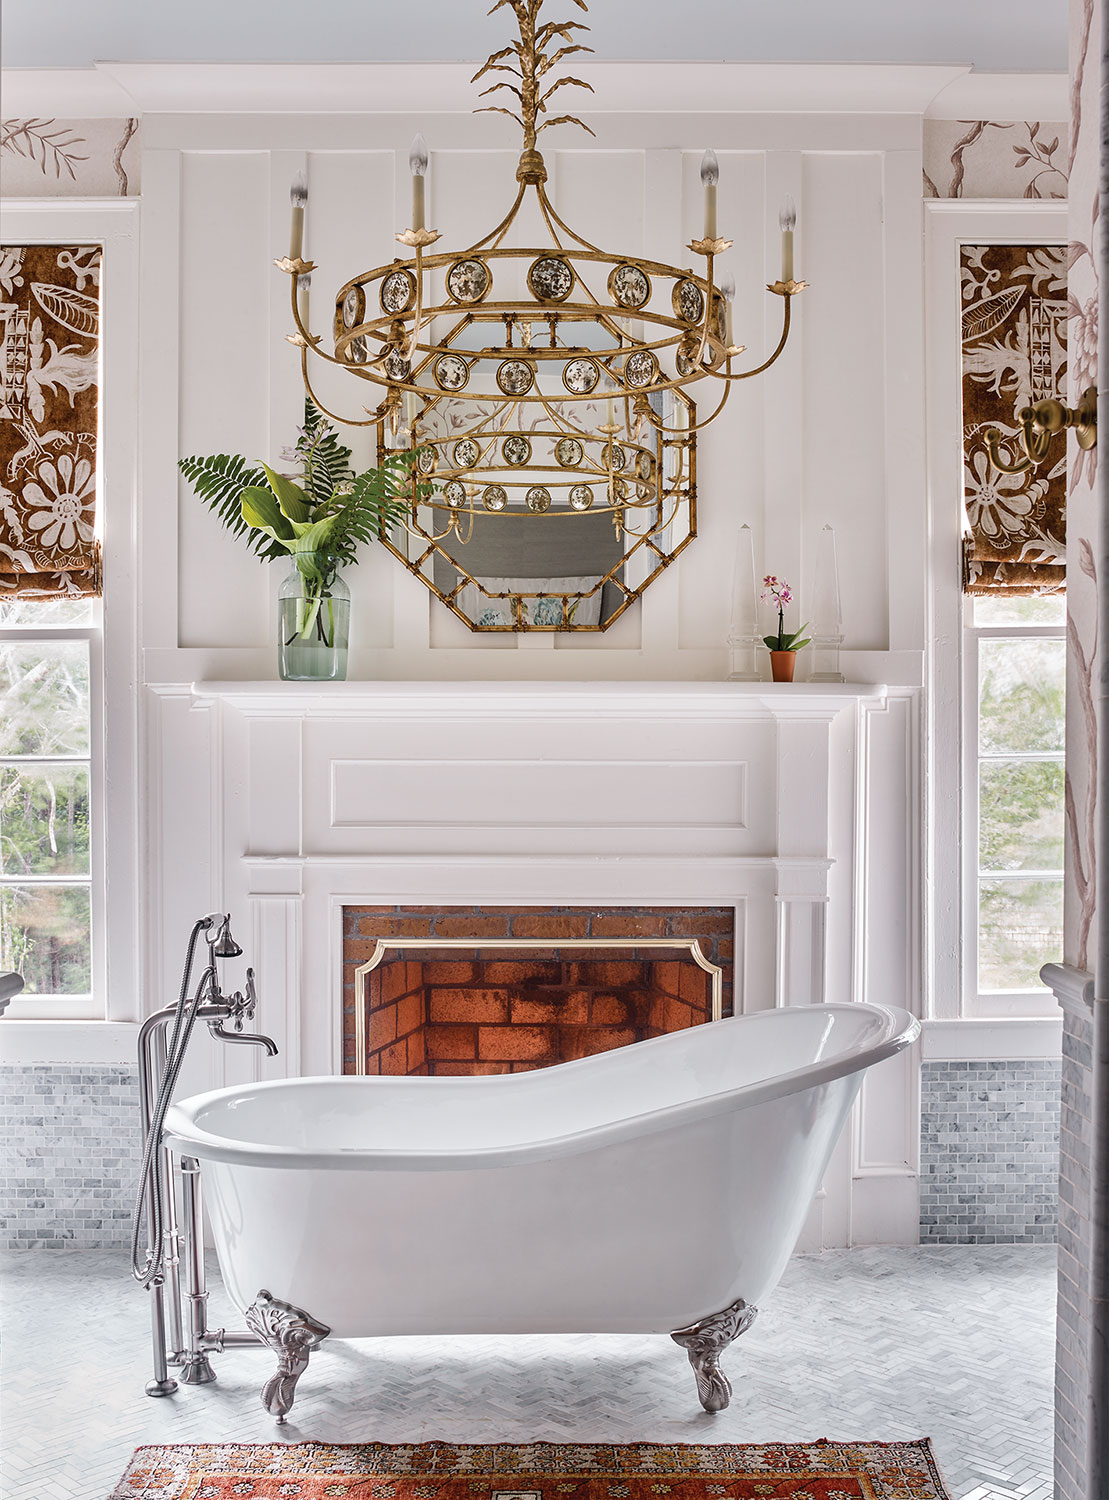 A photo of a master bath designed by James Farmer featuring a clawfoot tub under a gilded chandelier, in front of a fireplace, and light gray herringbone-pattern tile floor.